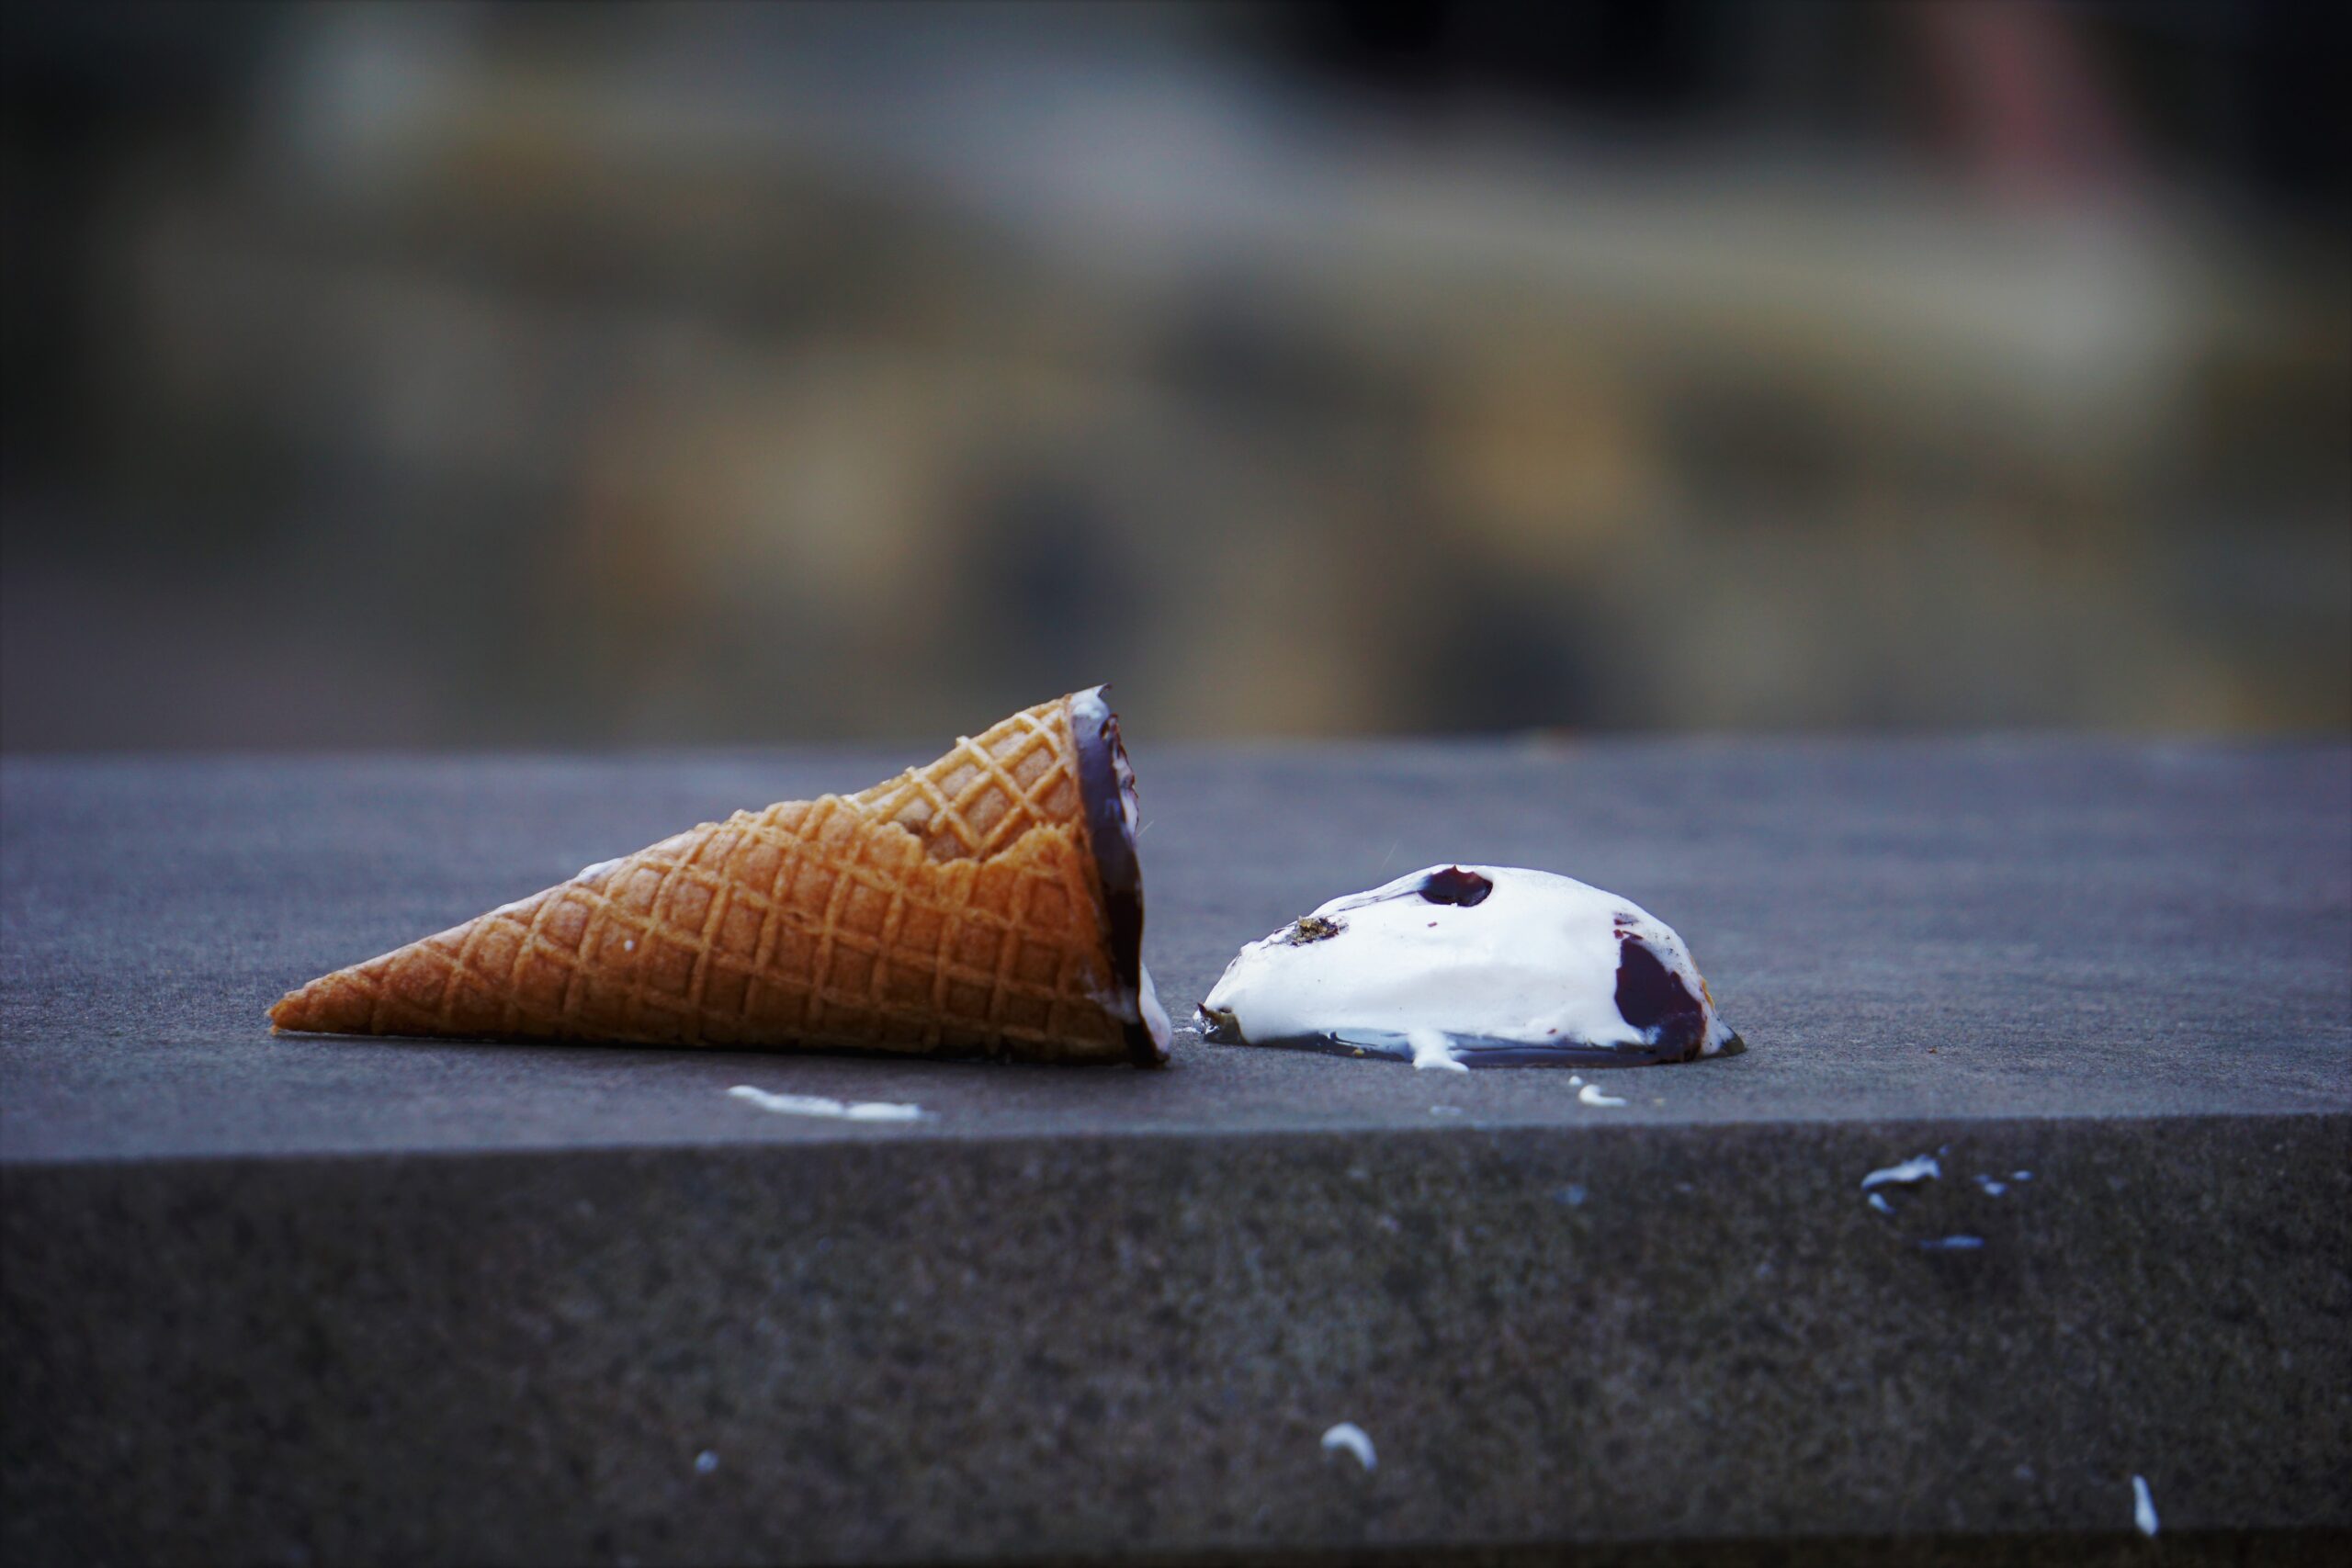 An ice cream cone lies on its side on the ground, the ice cream portion beginning to melt away.